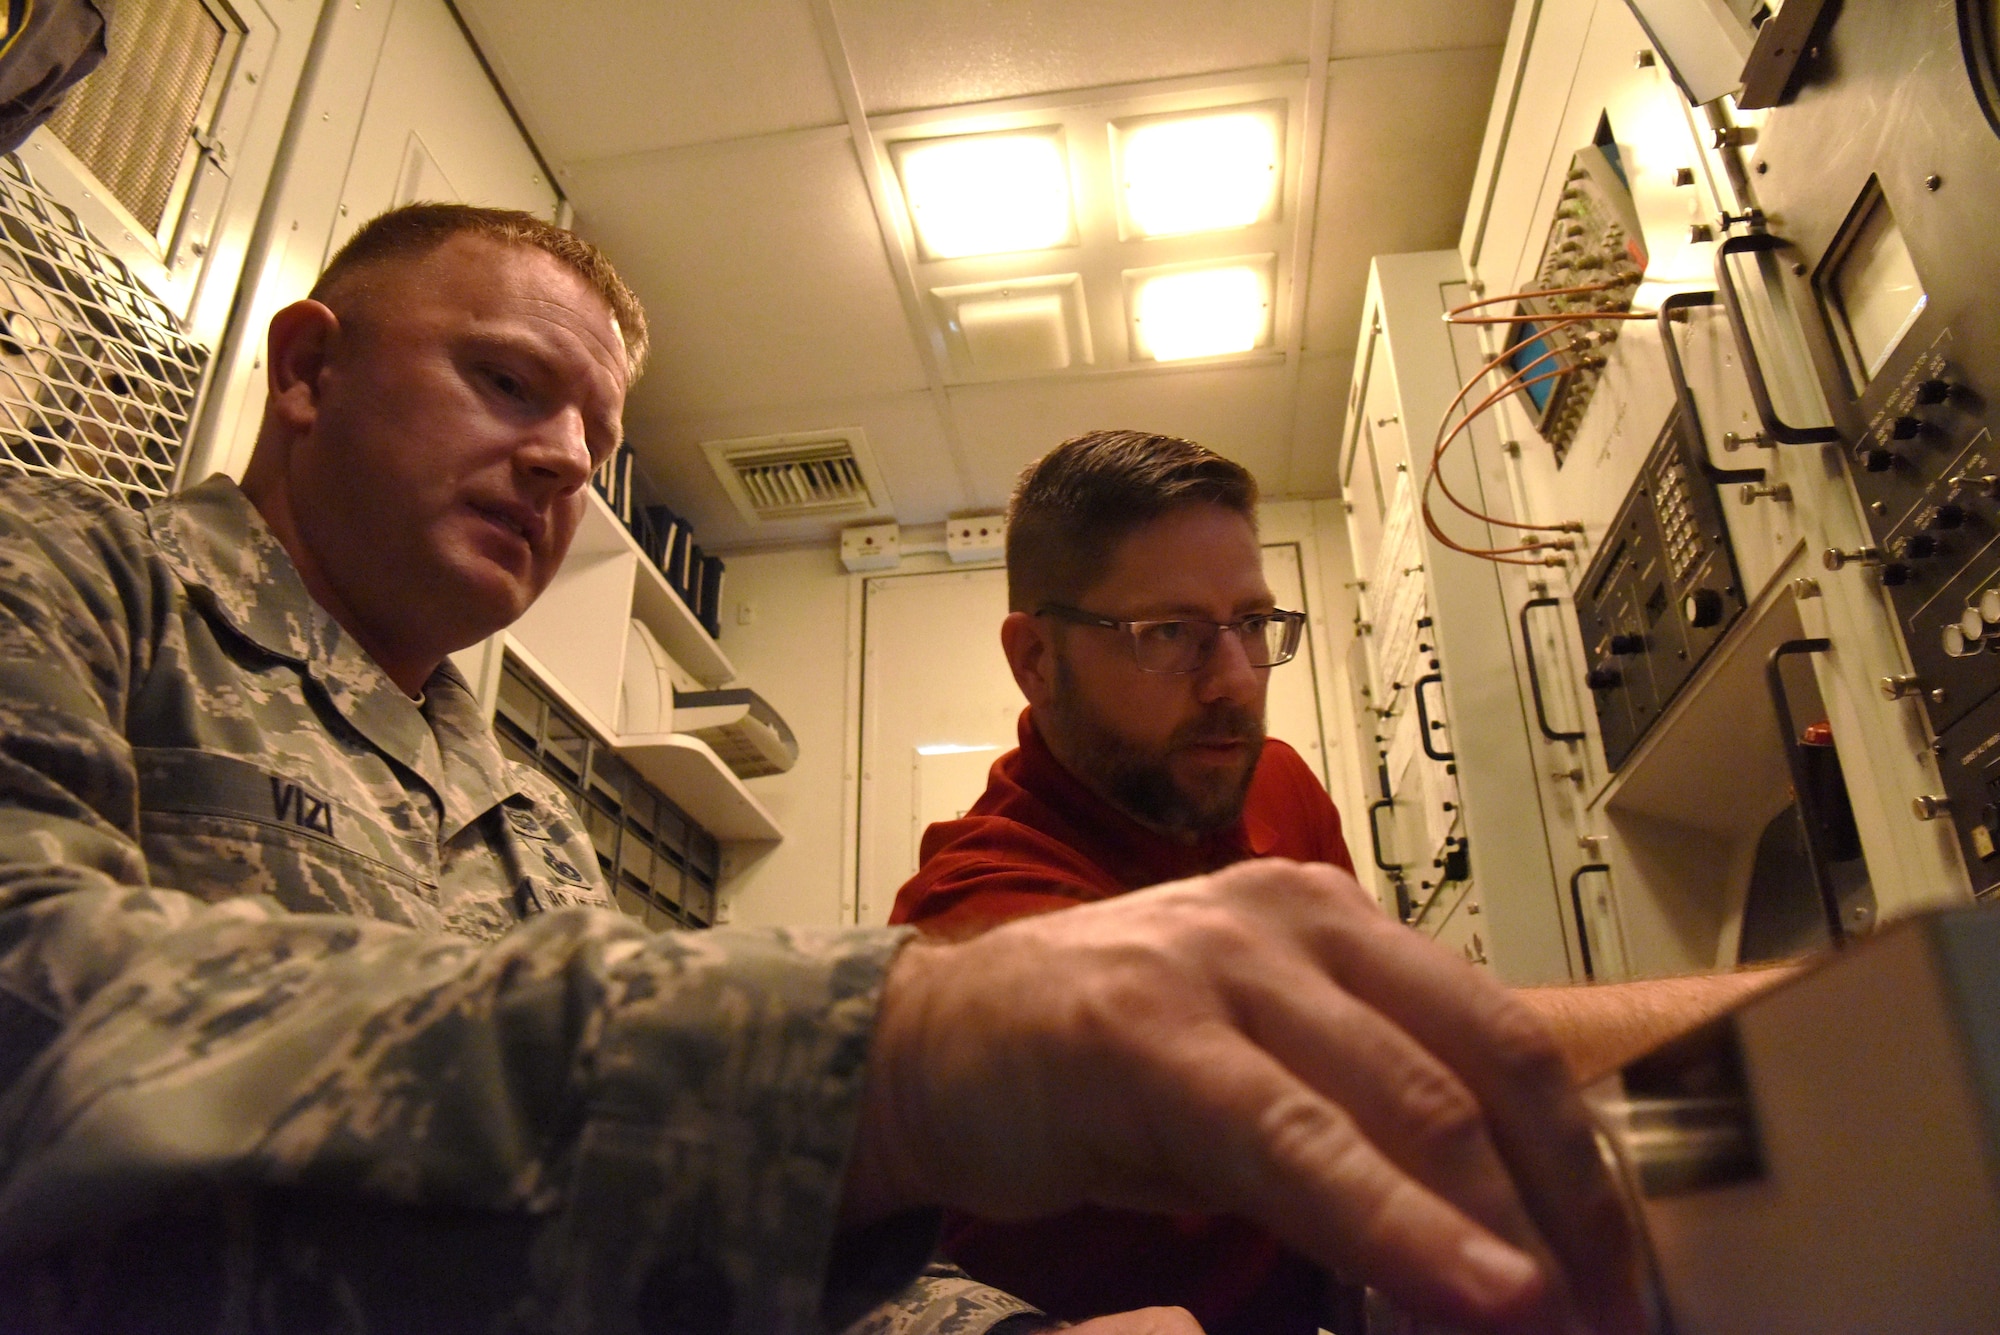 Shawn Pyle, 28th Operations Support Squadron range manager, shows Chief Master Sgt. Adam Vizi, the 28th Bomb Wing command chief, how to use a radar on a computer screen to Col. John Edwards, 28th Bomb Wing commander, at the Powder River Training Complex in Colony, Wyoming, June 21, 2018. The PRTC is a 34,000-square mile training facility where aircraft from across the Air Force can practice how to combat threats with new technology. (U.S. Air Force phot by Airman 1st Class Thomas Karol)